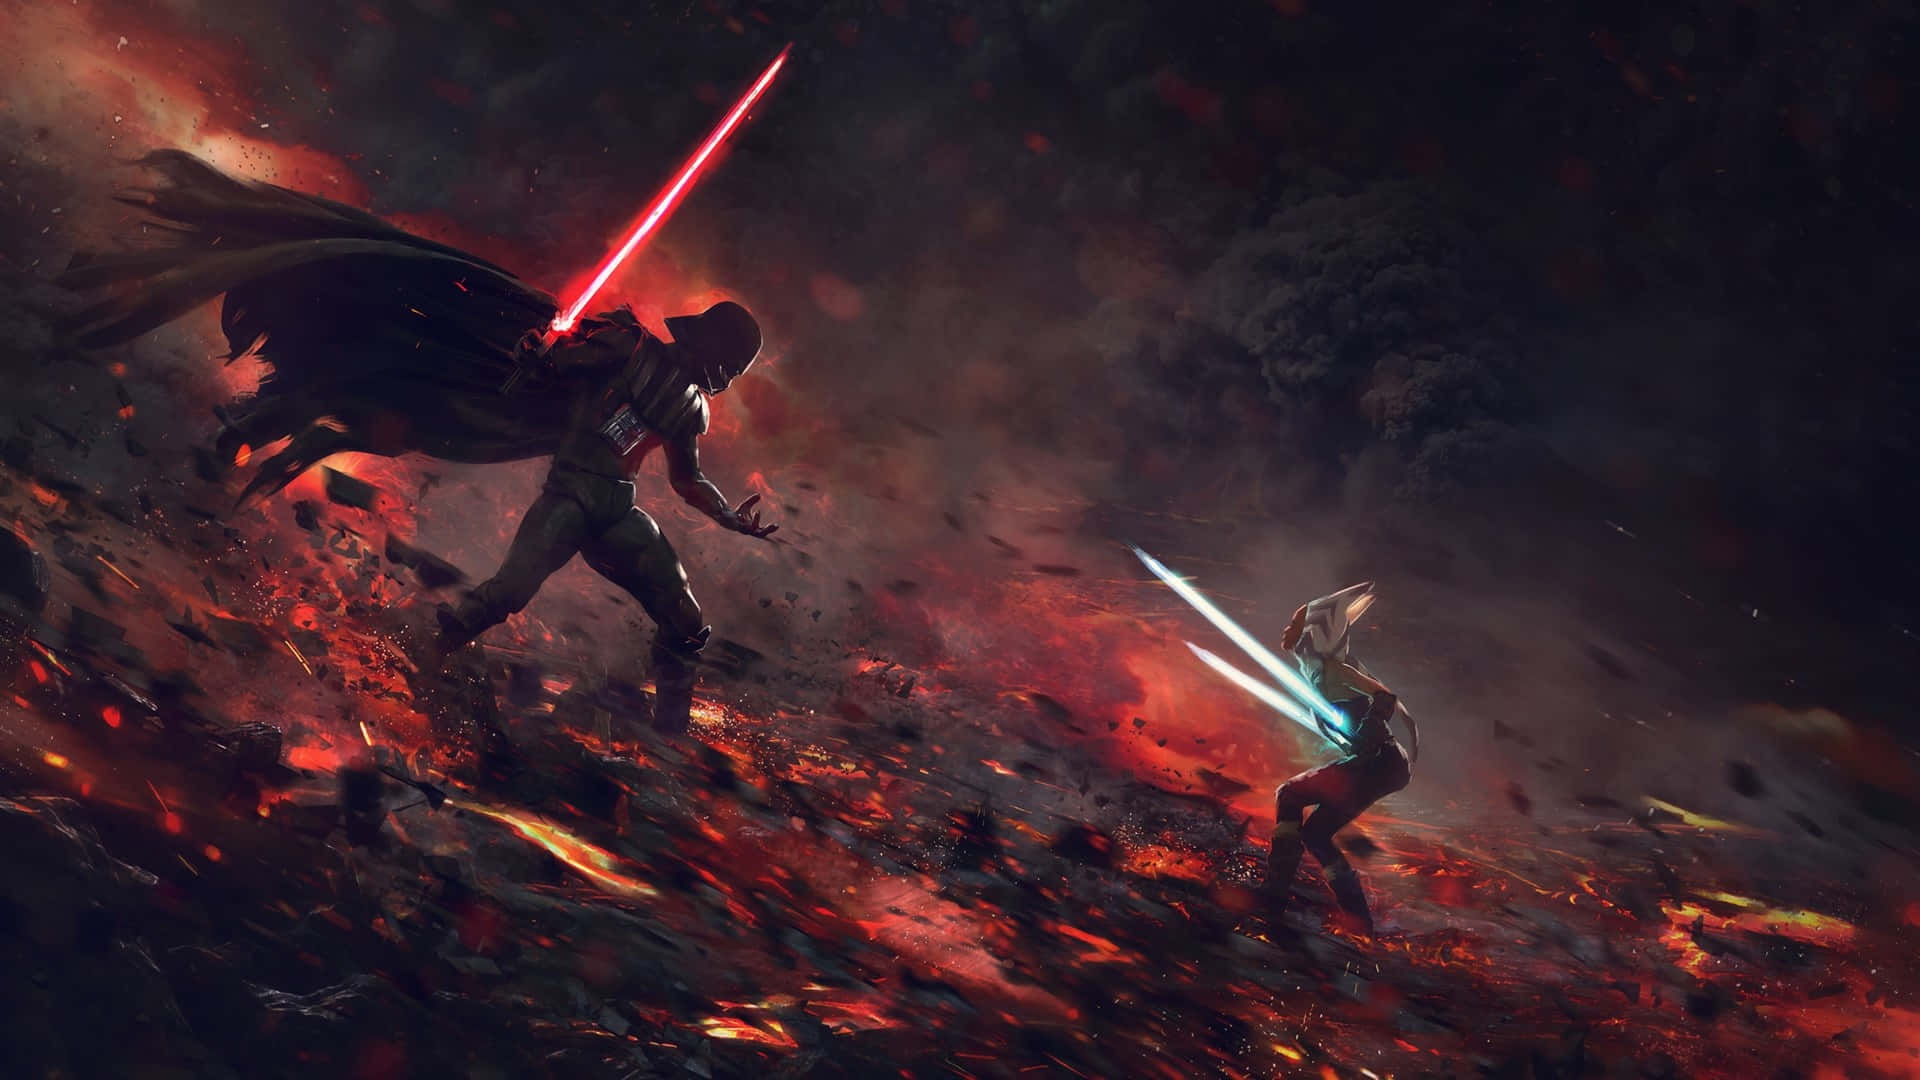 Epic Lightsaber Battle between Jedi and Sith Wallpaper